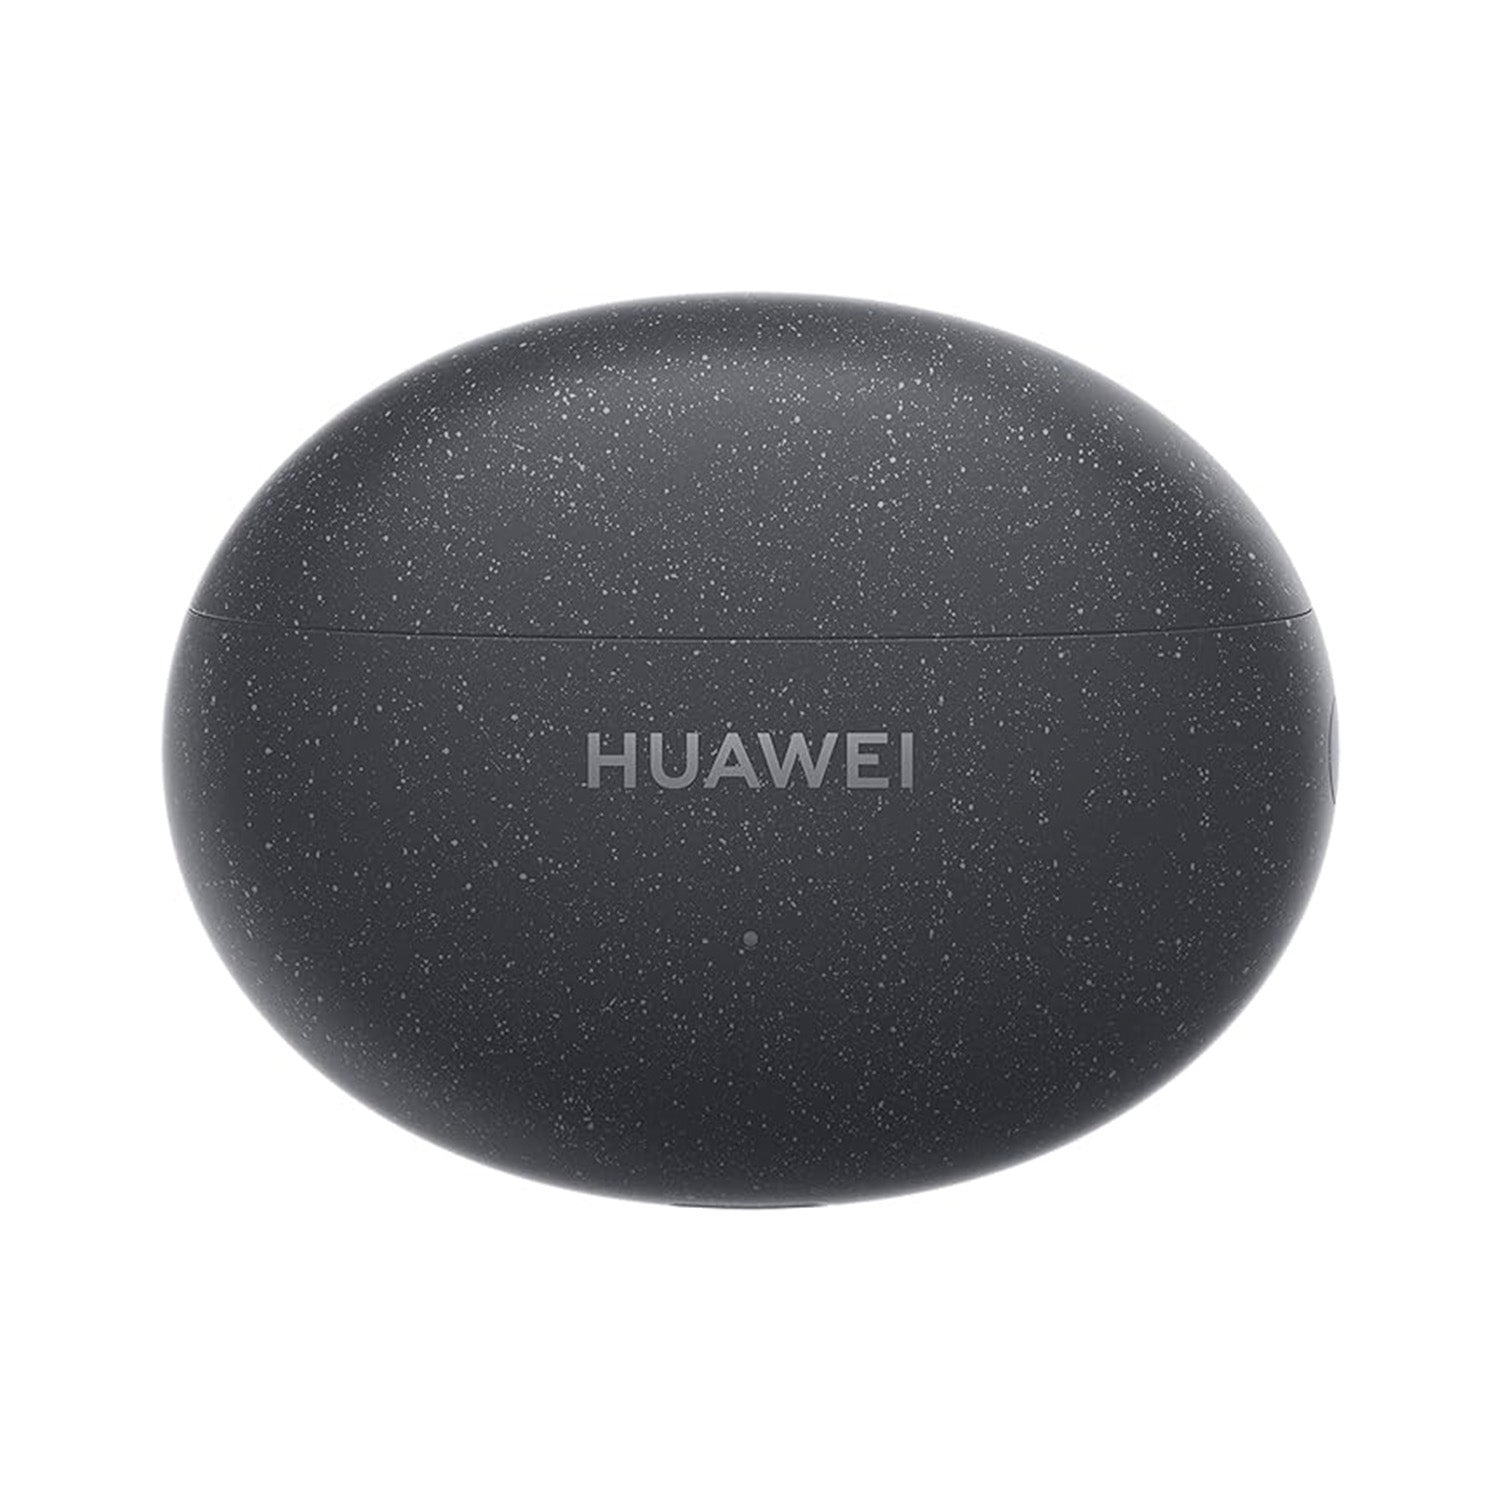 HUAWEI FreeBuds 5i Wireless Earbuds | Noise Cancelling Earphones | Long Lasting Battery Life | 10 mm dynamic driver | Bluetooth 5.2 | Water Resistant in-Ear Headphones - Nebula Black  (55036653)